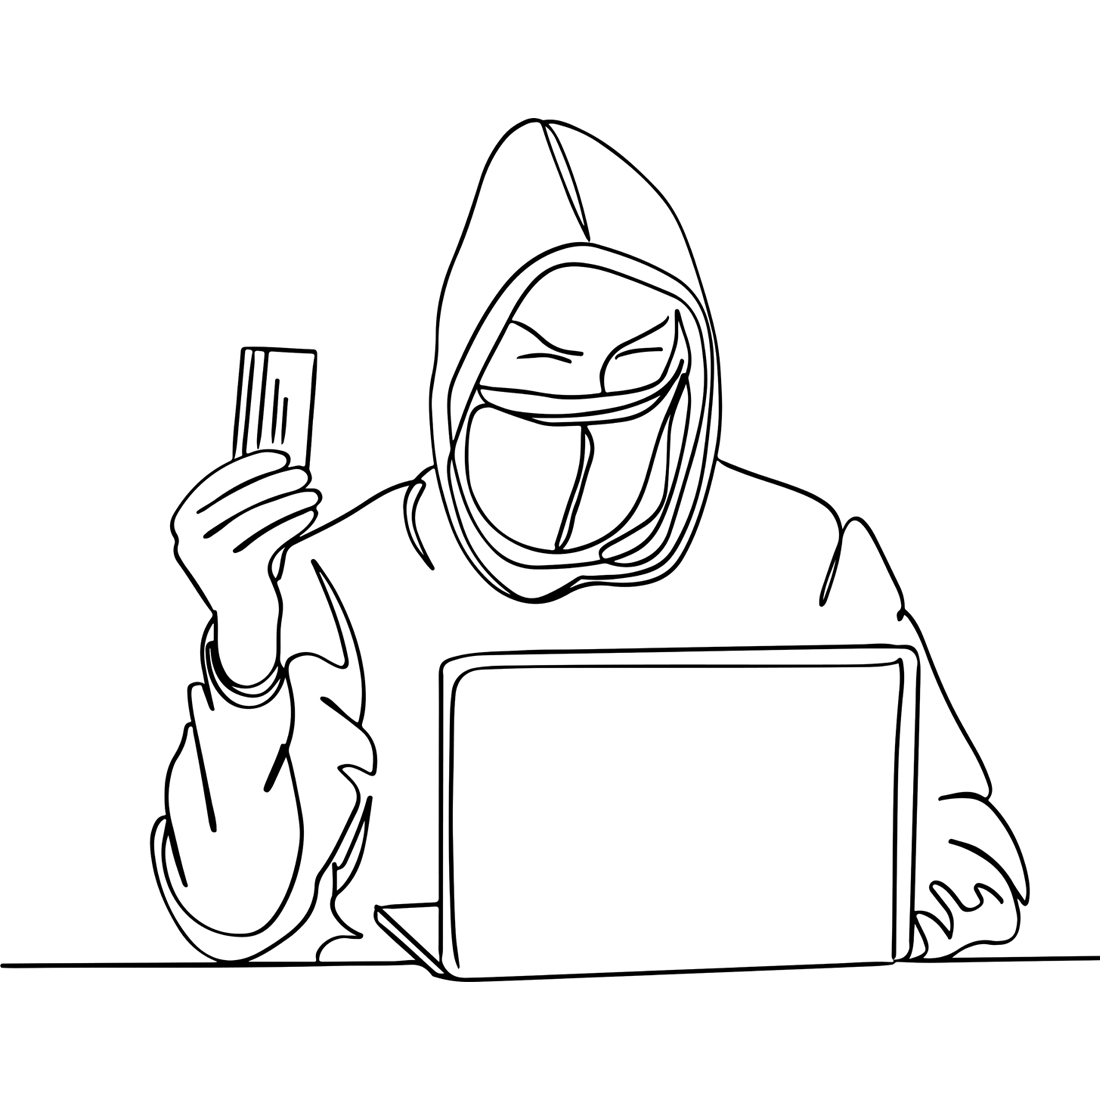 Phone Fraud Alert: Cartoon Illustration of Online Hacker with Credit Card, Hacking Chronicles: One-Line Drawing of Cyber Criminal in Mask preview image.